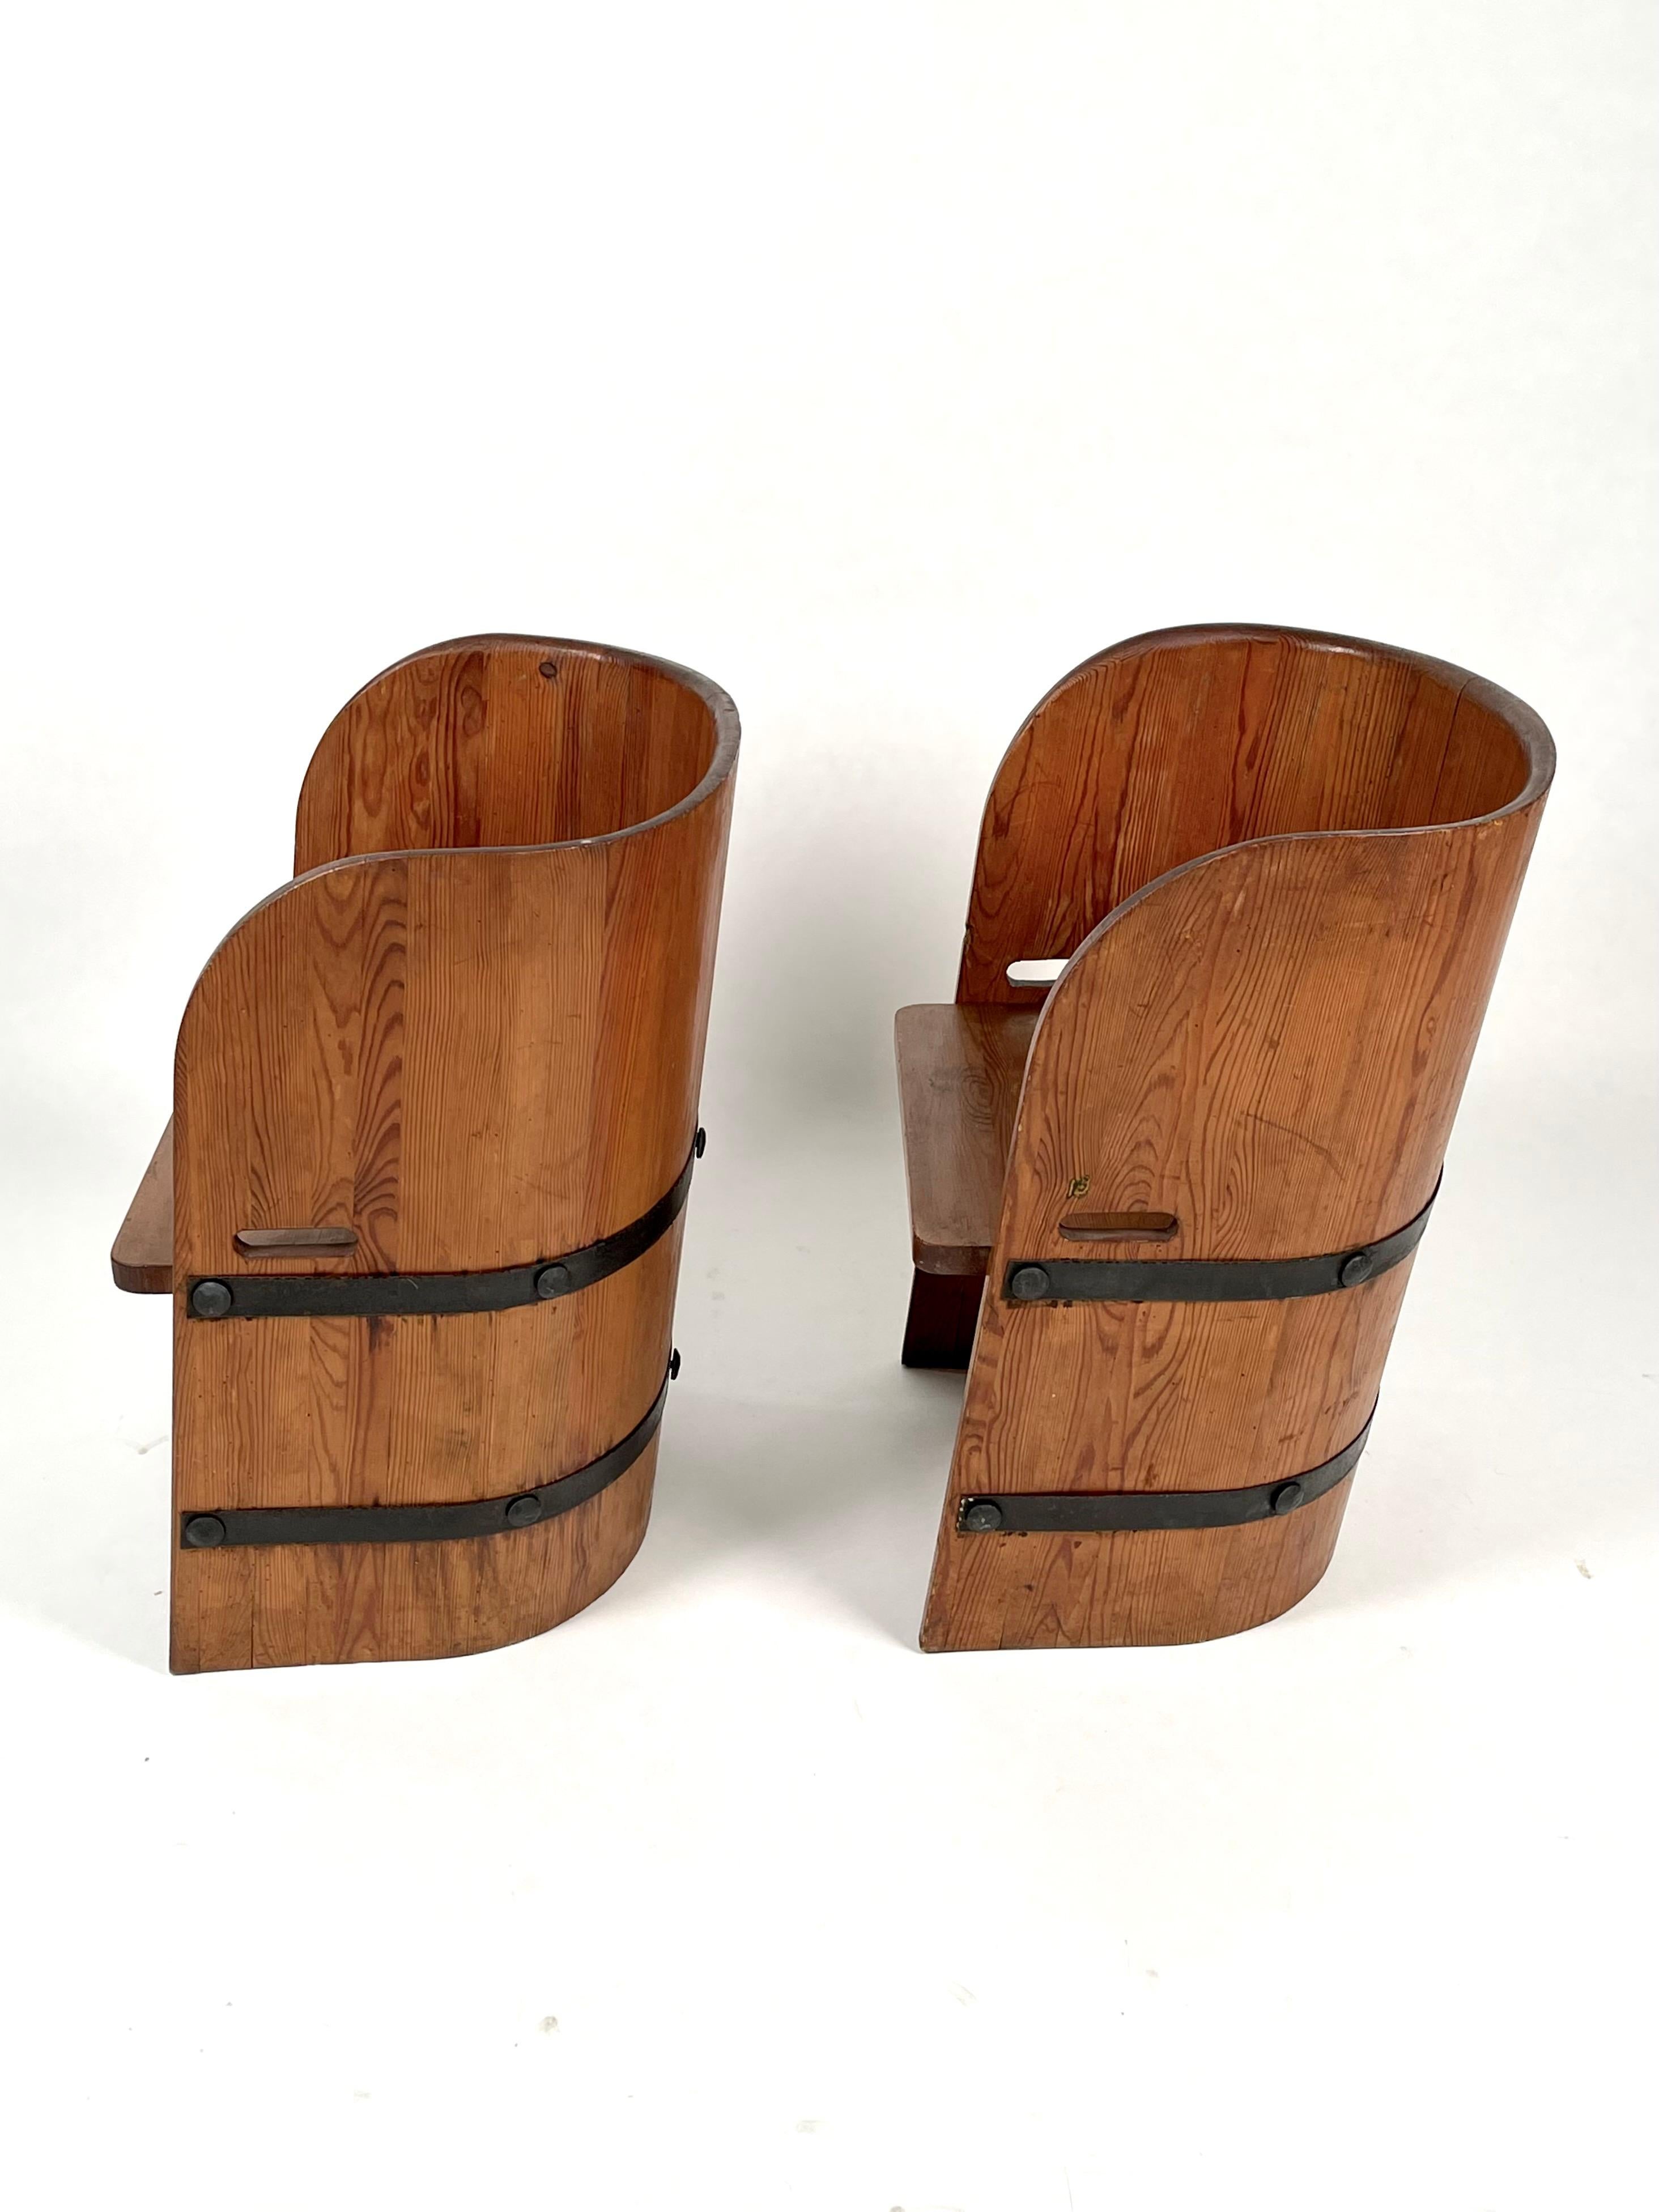 Swedish Axel-Einar Hjorth, Attributed, Pair of Solid Pine & Armchairs, Sweden, 1930-40s